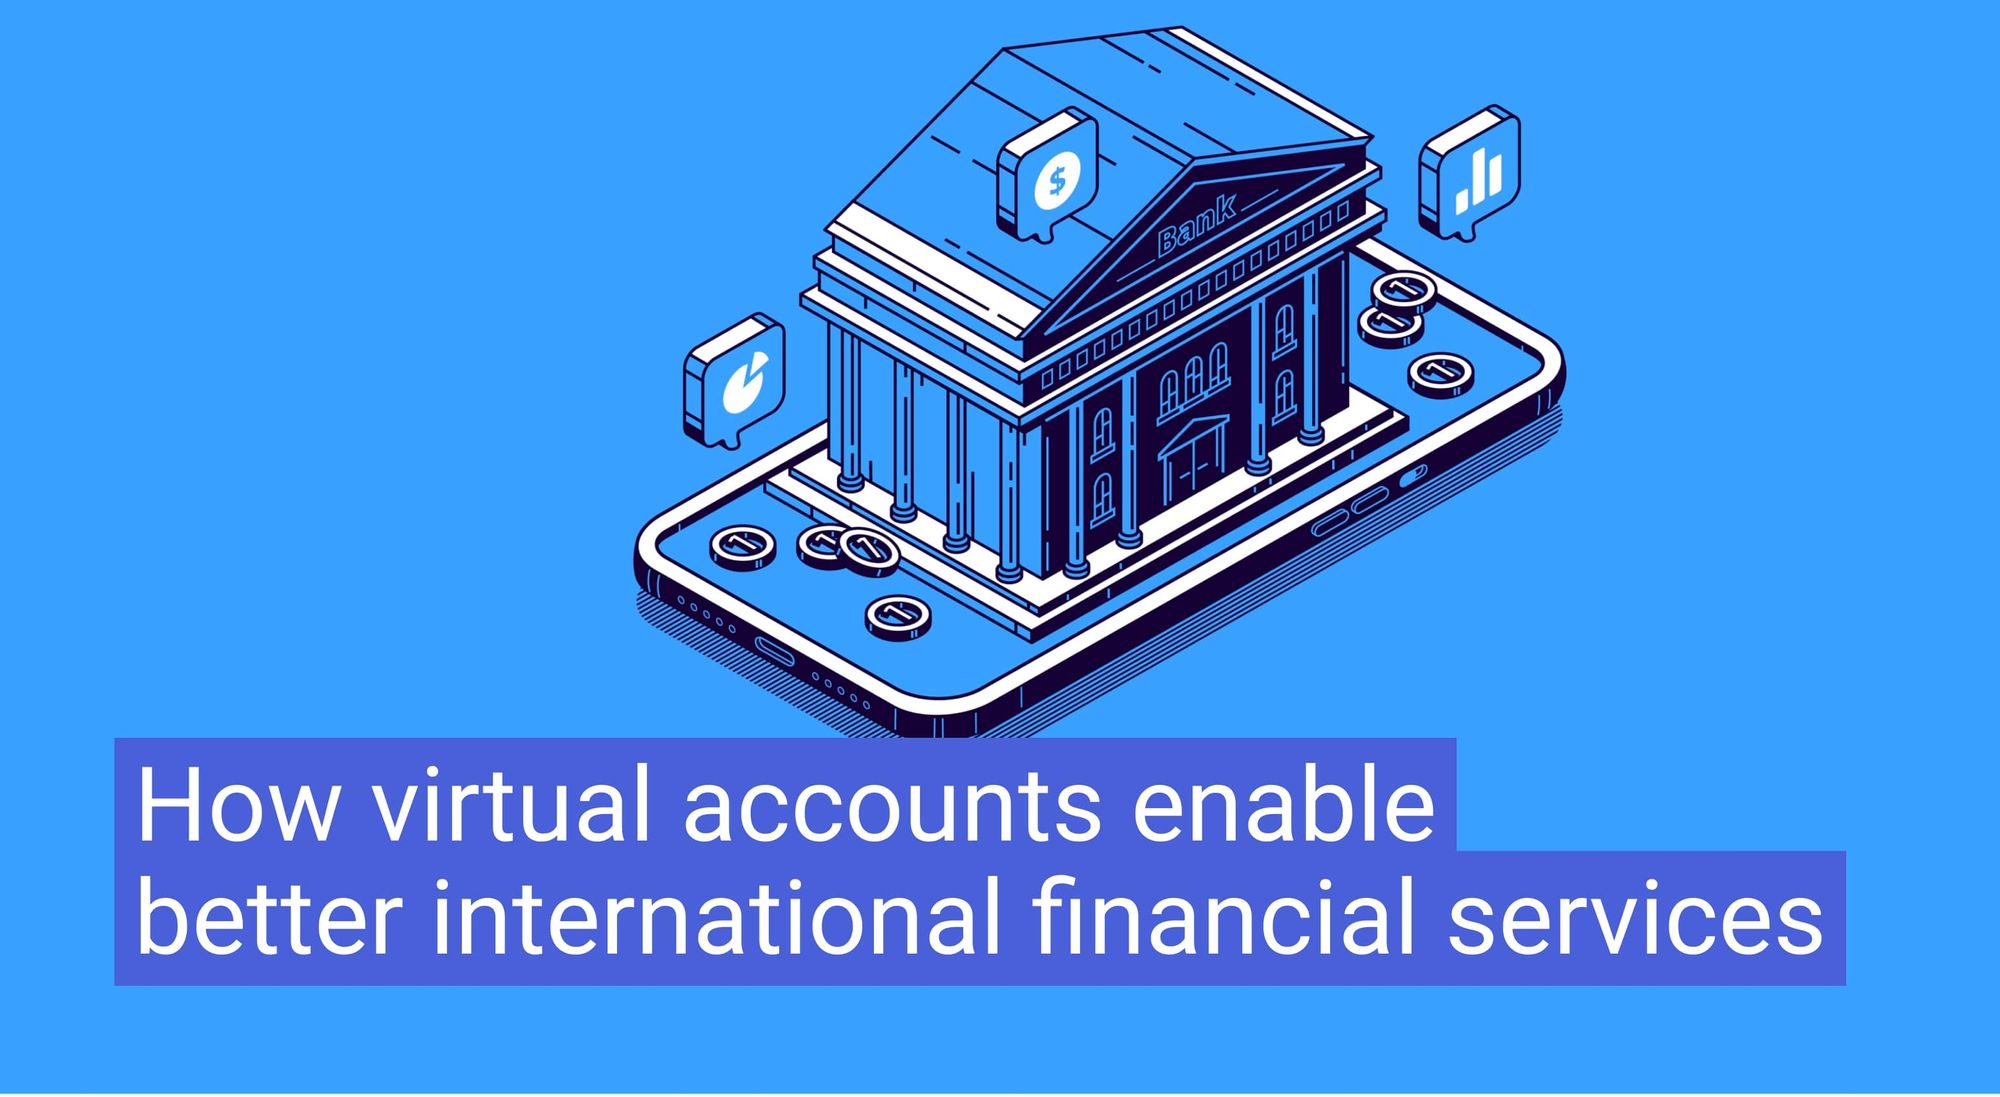 How virtual accounts enable better international financial services